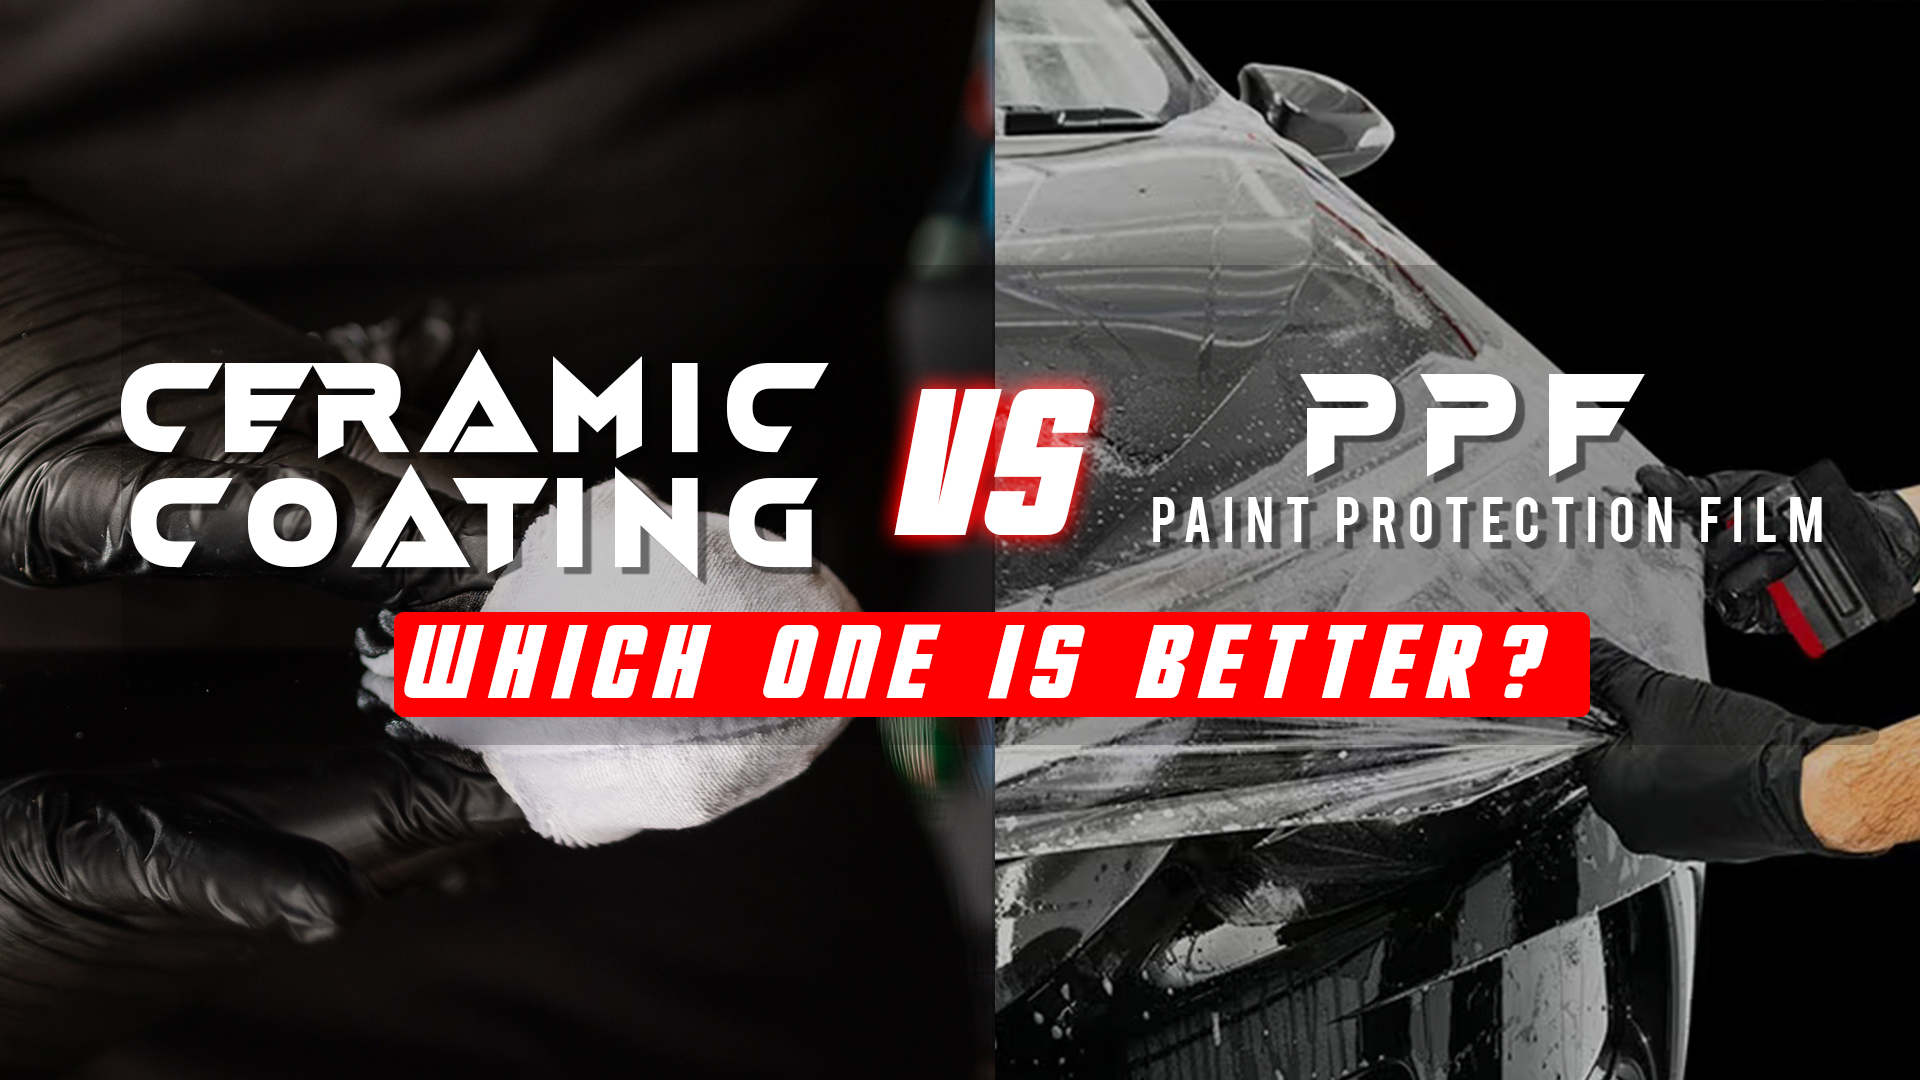 Ceramic coating vs ppf, which one is better? Detailed Comparison